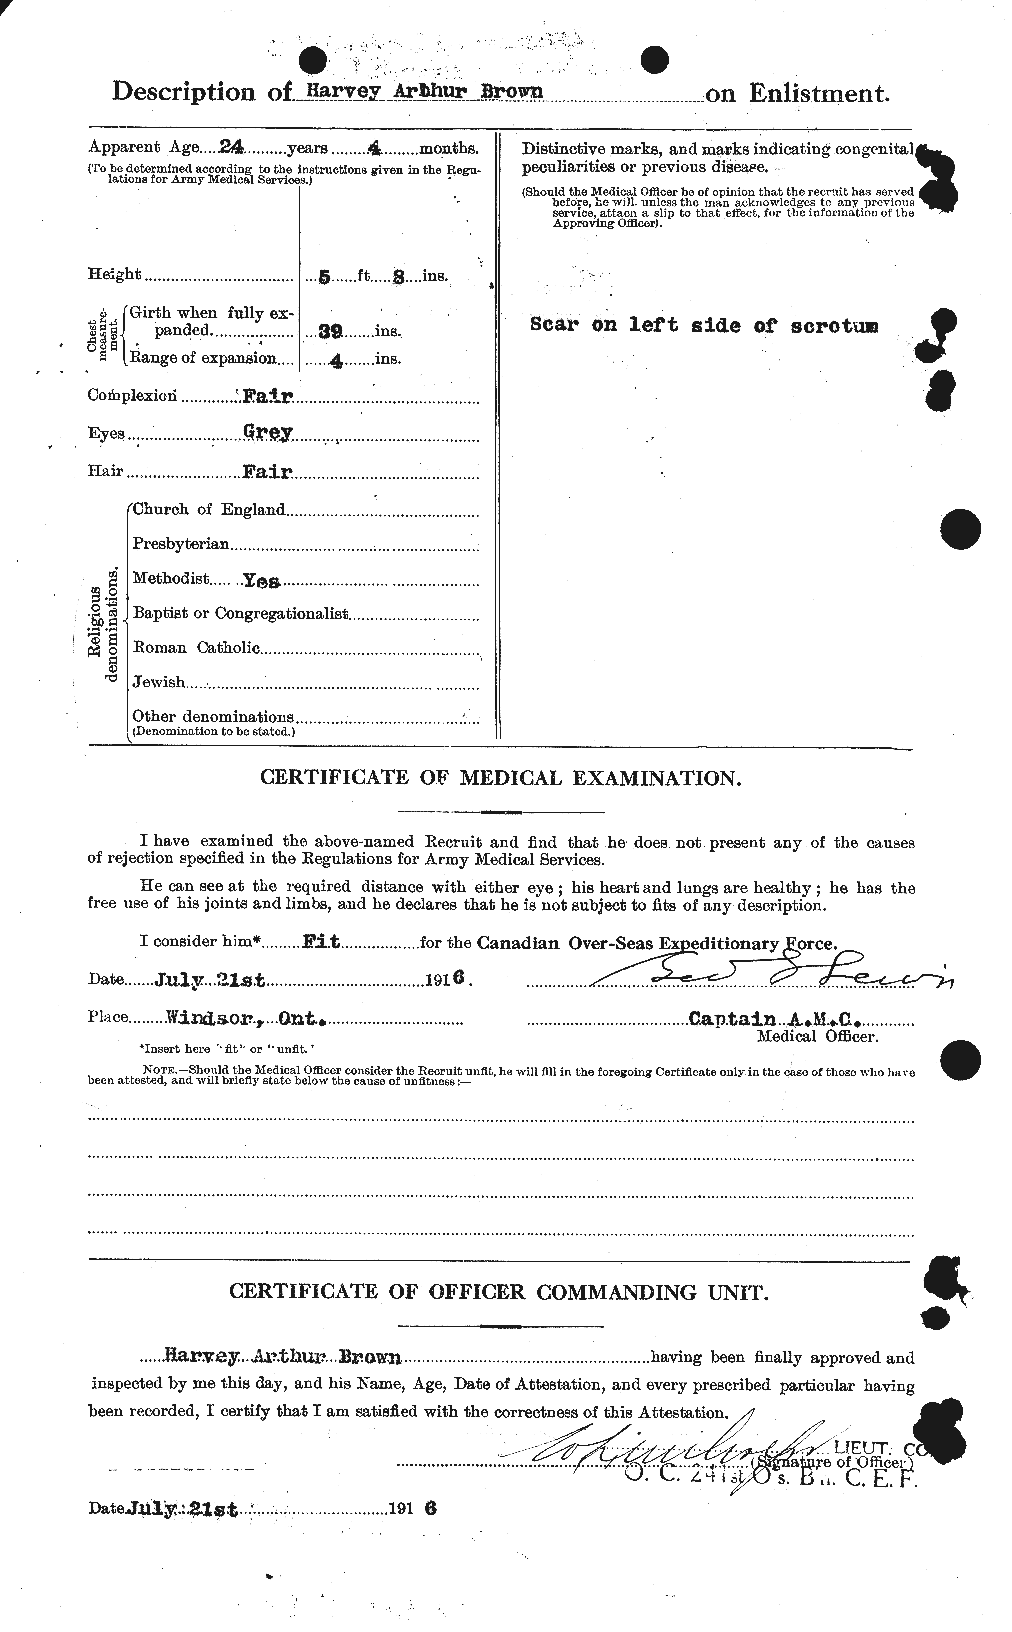 Personnel Records of the First World War - CEF 265485b